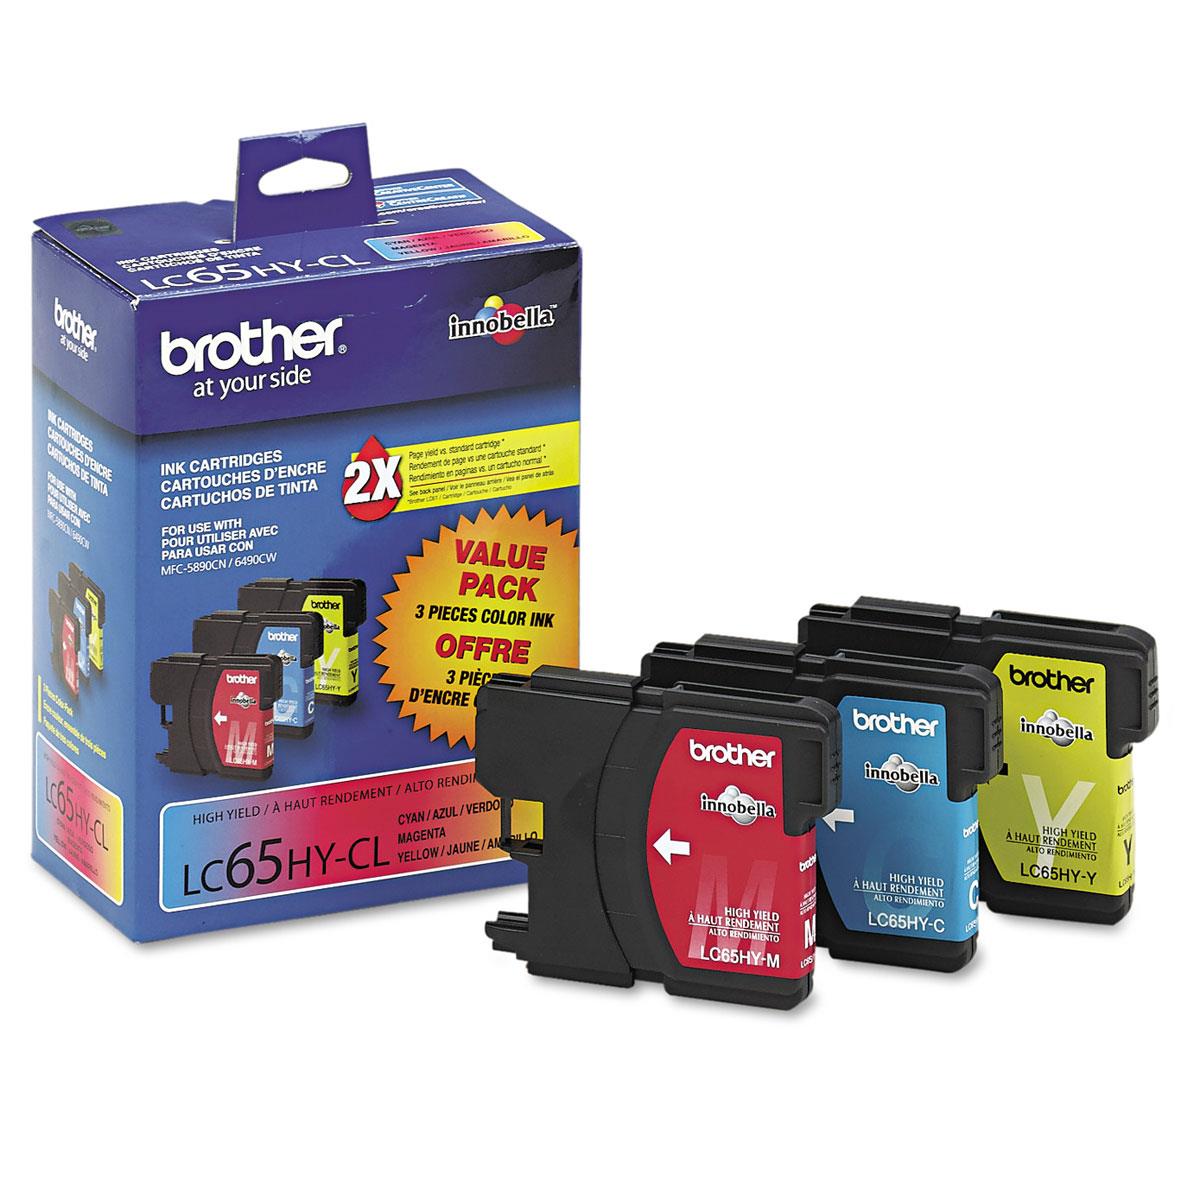 Image of Brother LC653PKS High Yield Cyan/Magenta/Yellow Ink Cartridges